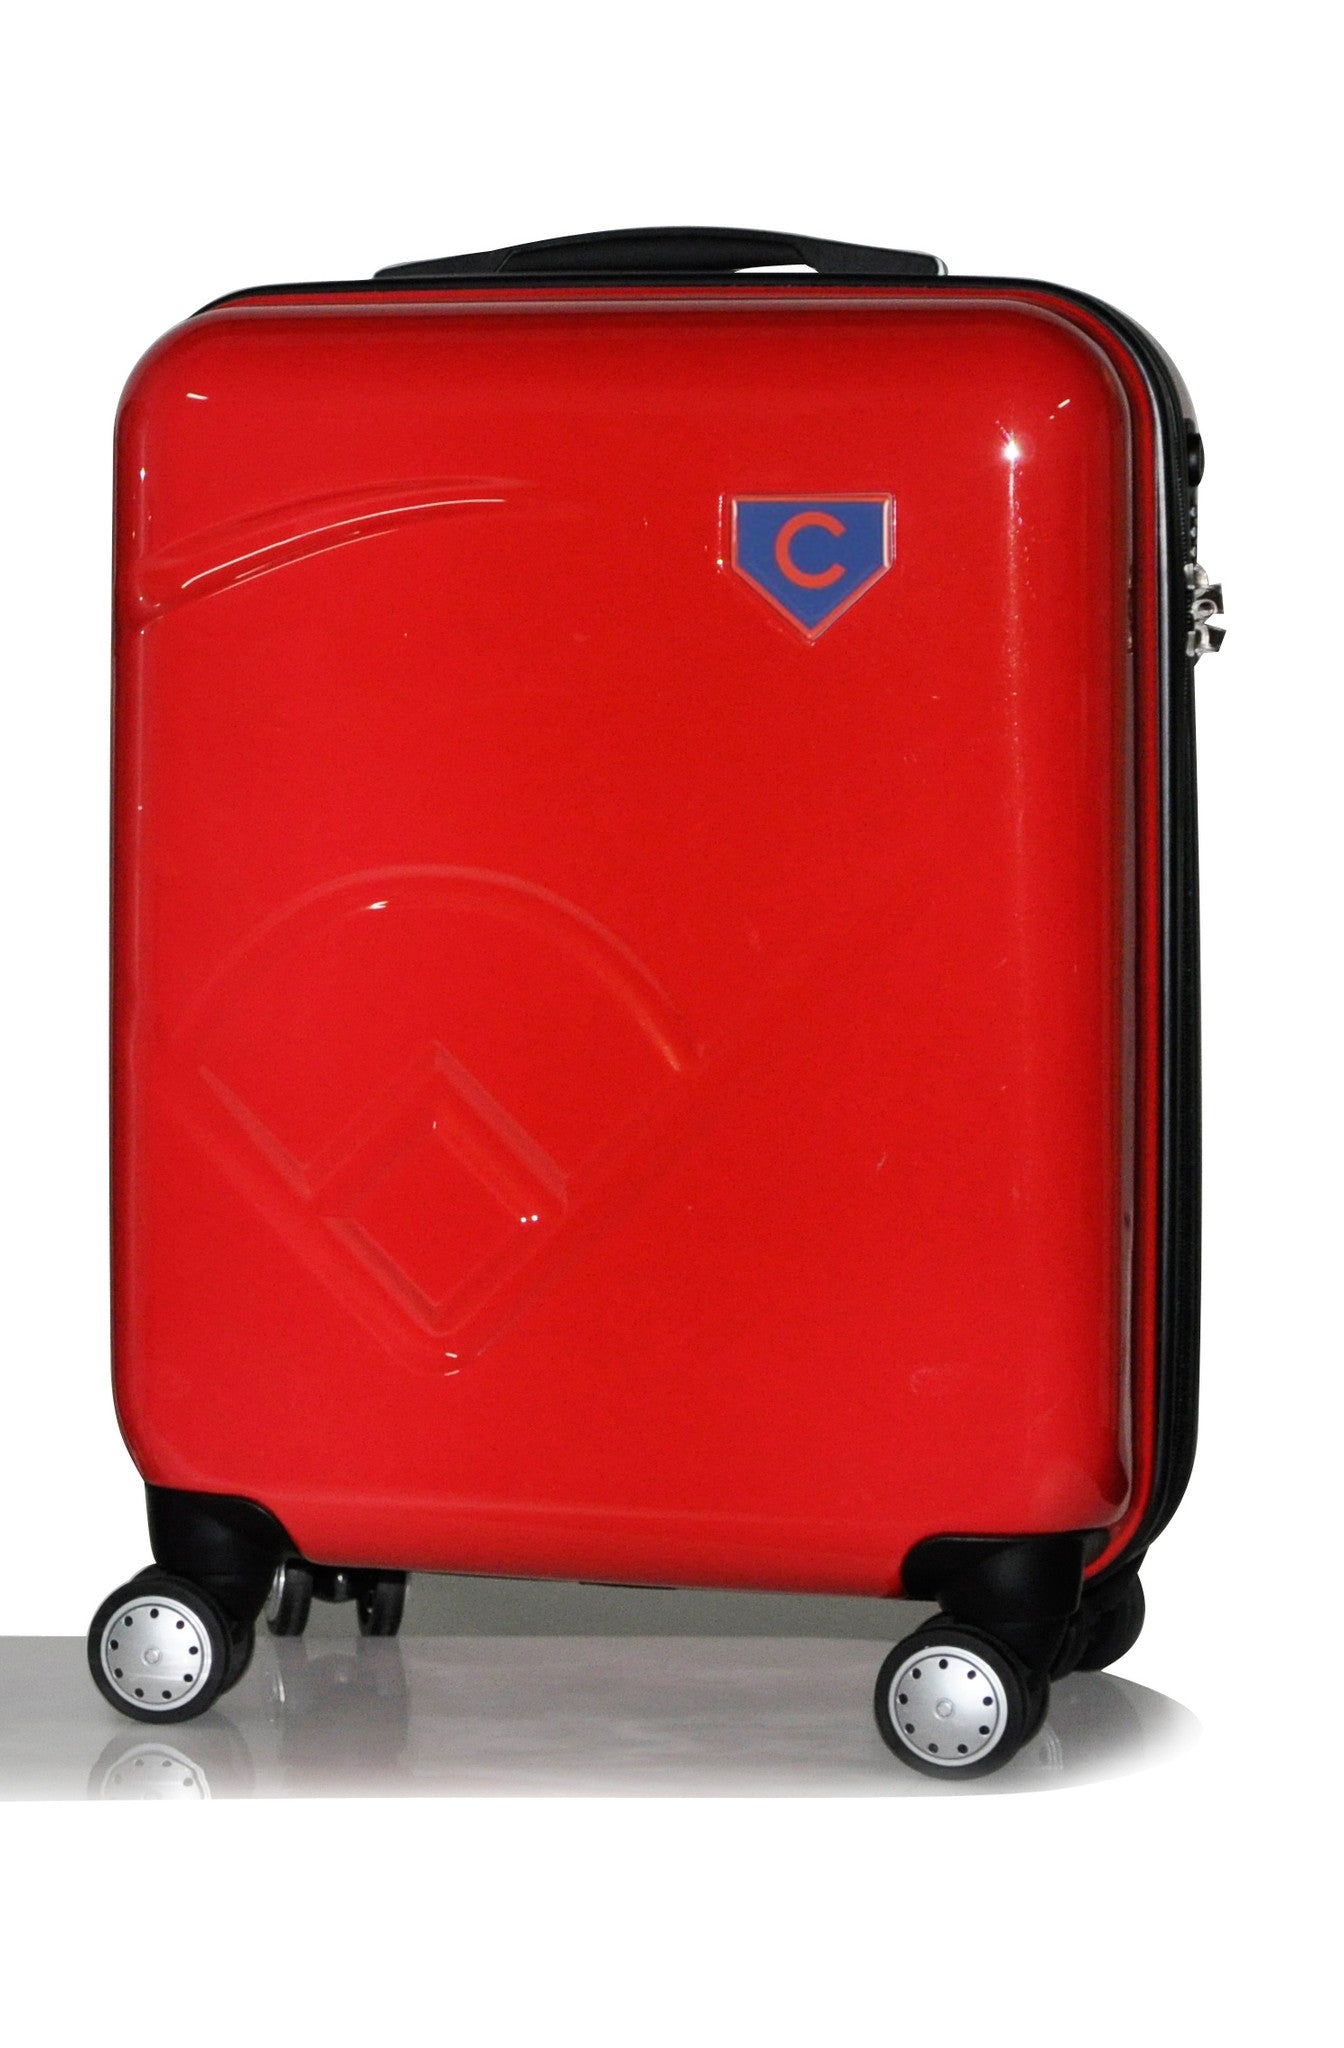 Chicago Cubs, 19" Premium Molded Luggage by Kaybull #CUB-19PCF-IFD - OBM Distribution, Inc.